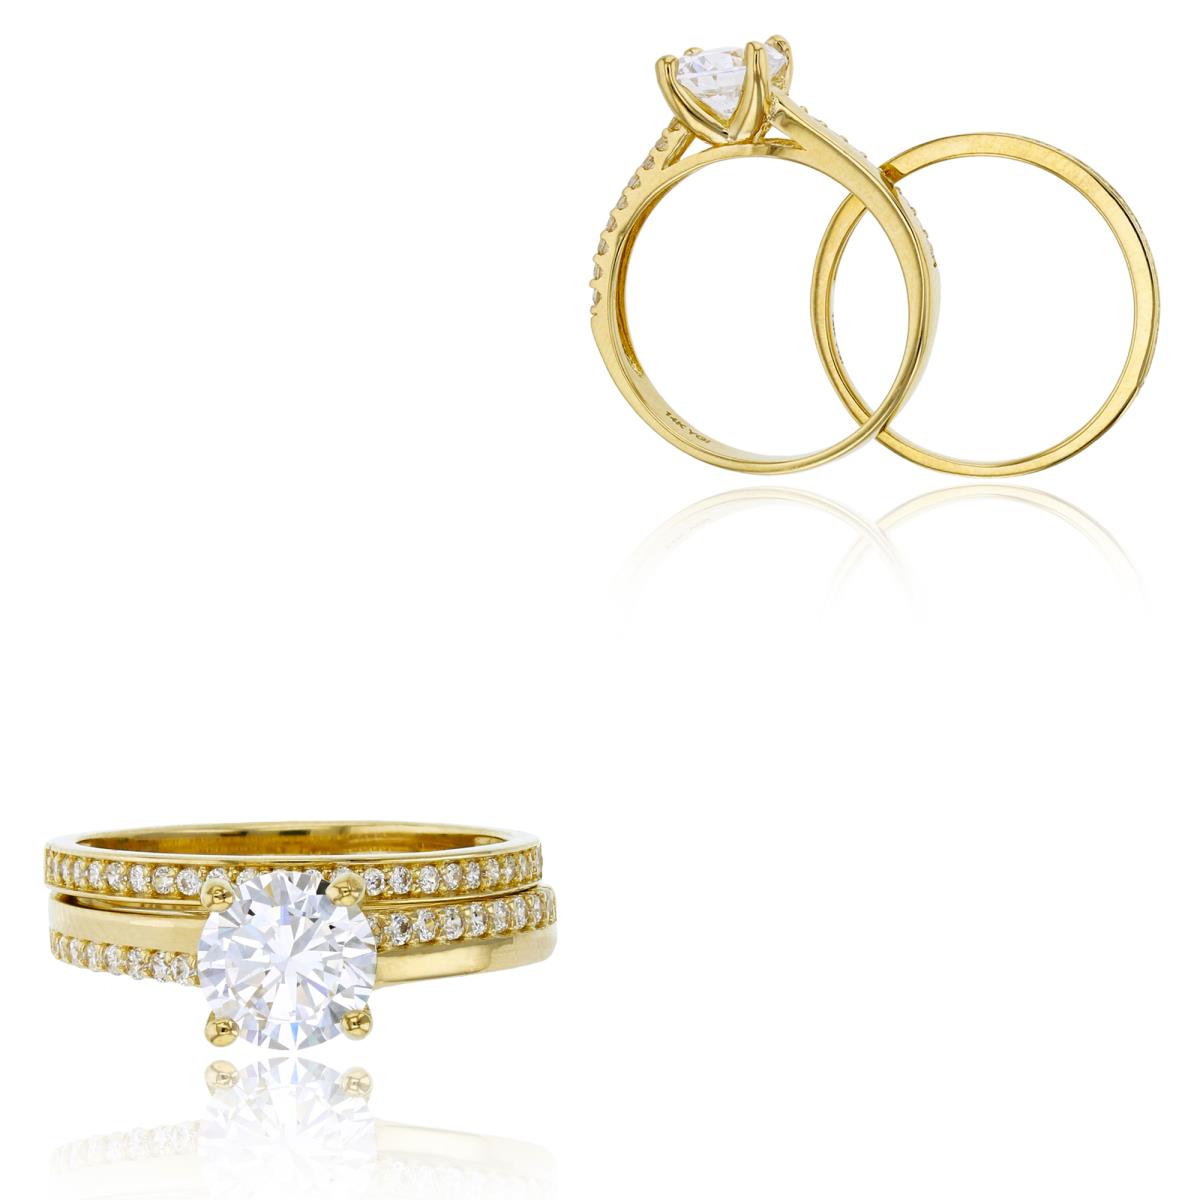 10K Yellow Gold 7mm Round Cut Polished & Micropave Wedding Duo Ring